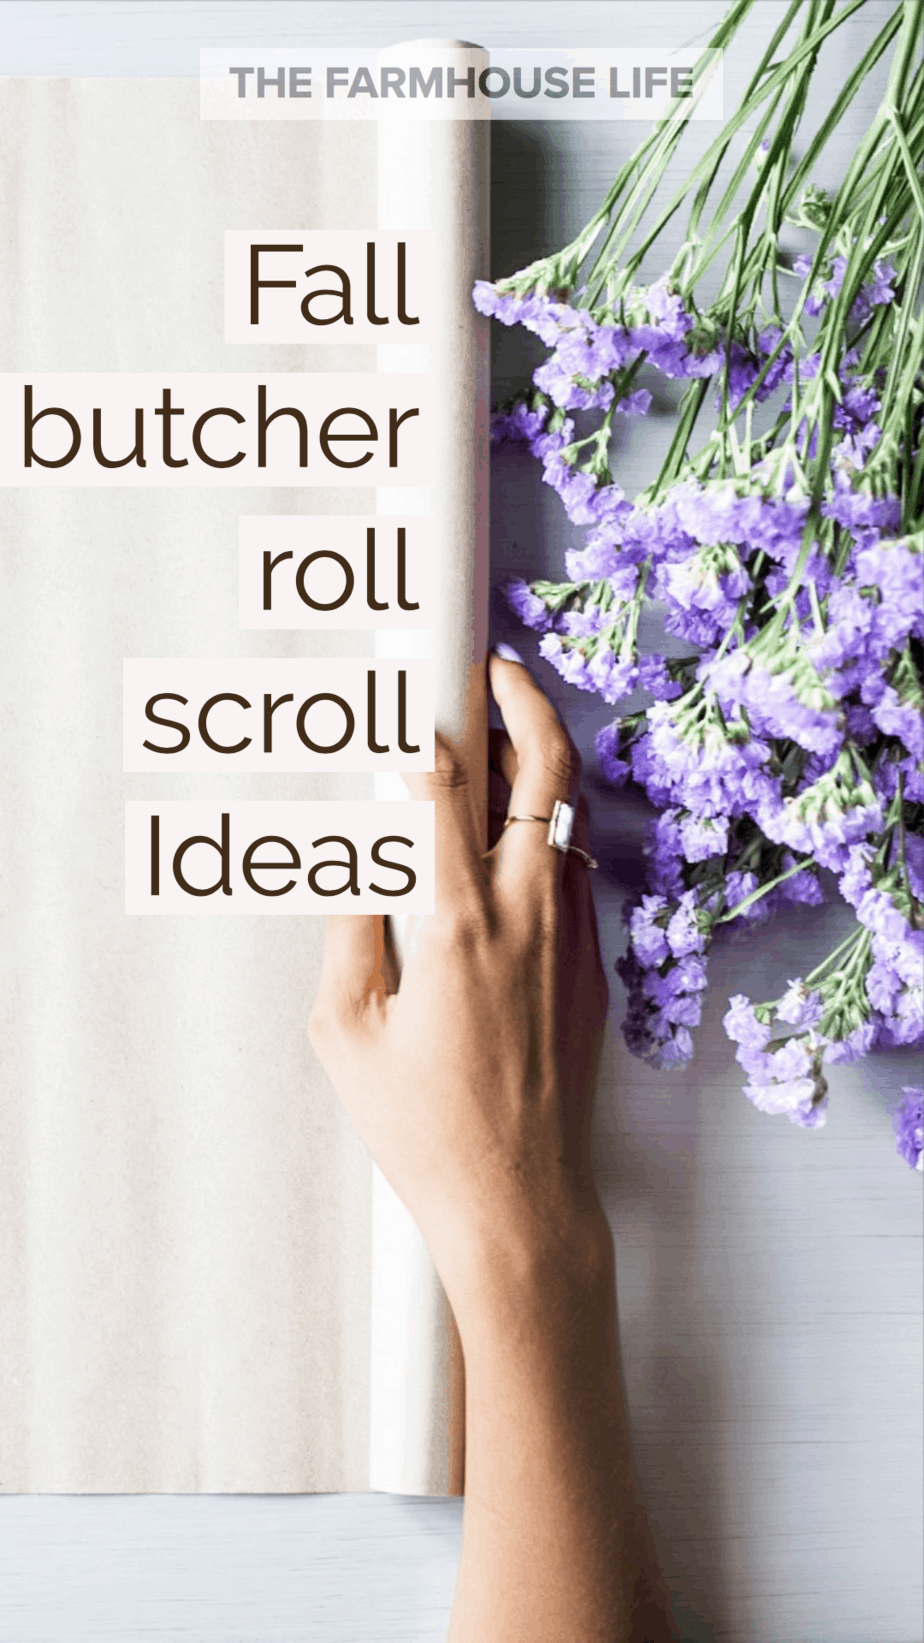 lavender flowers and butcher roll